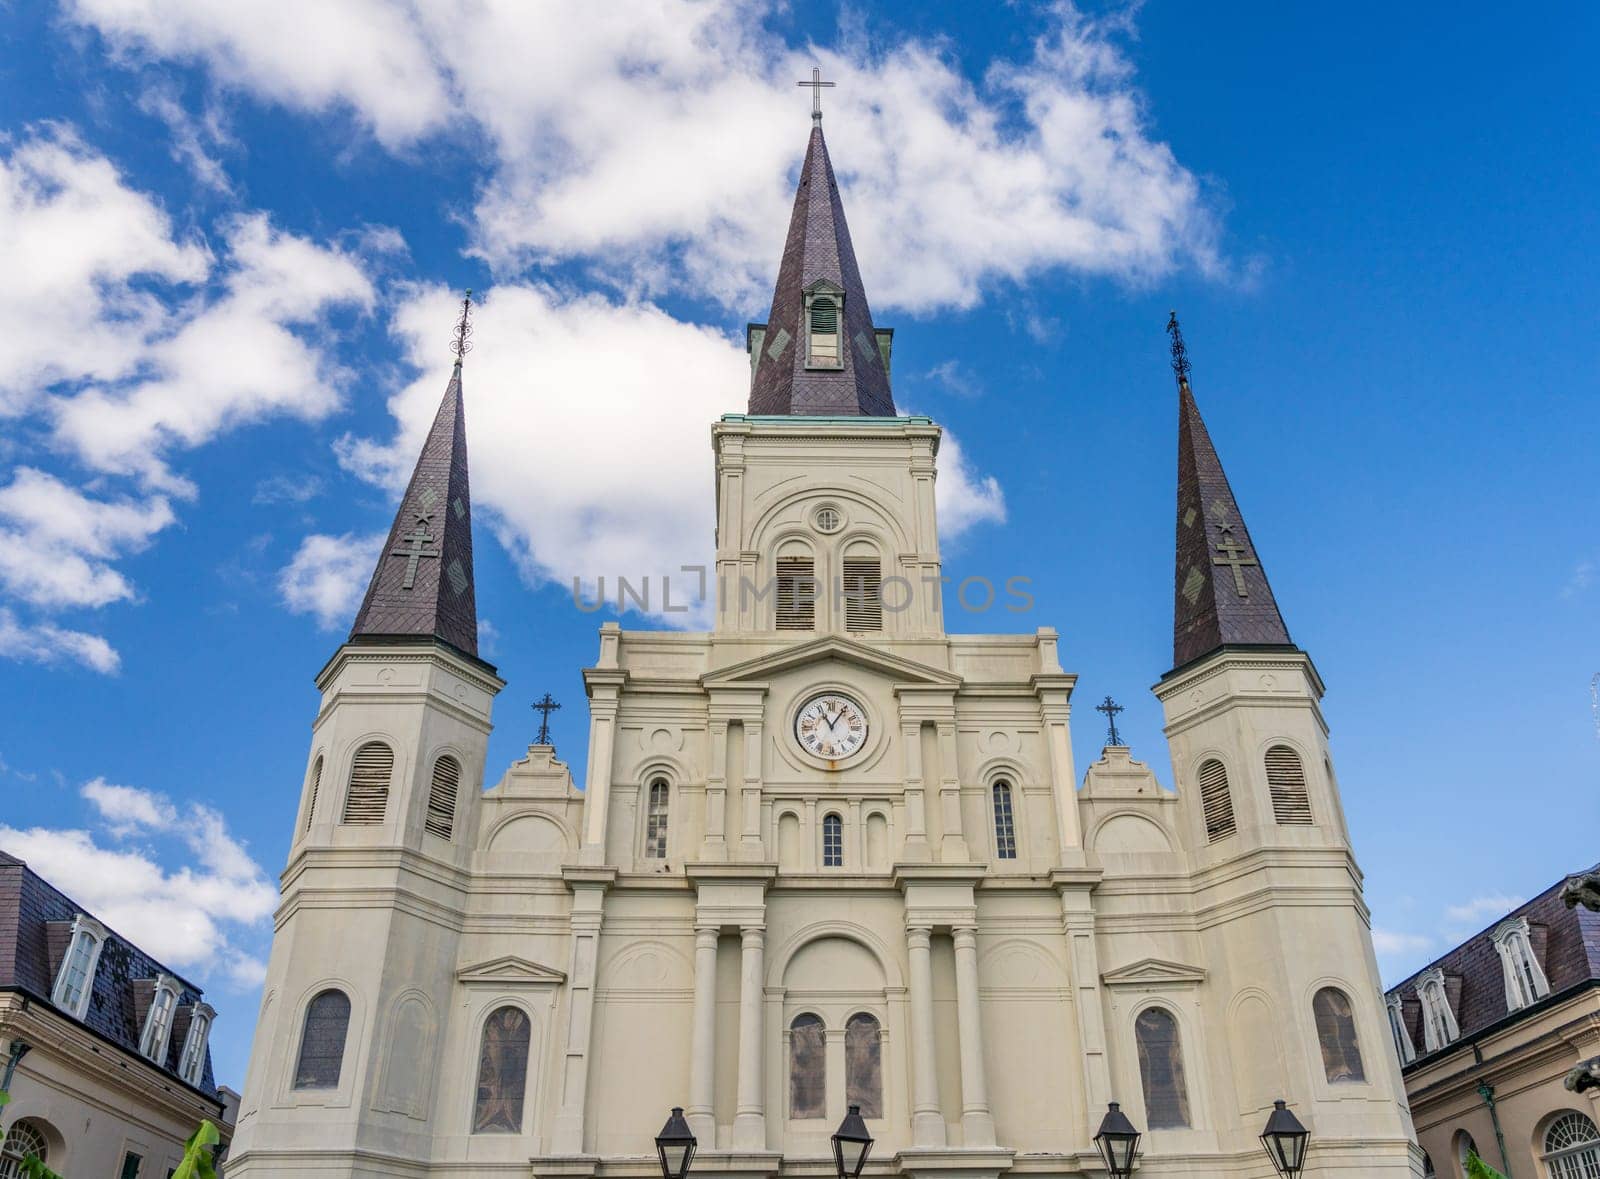 Facade and spires of the Cathedral of St Louis, King of France in the French Quarter of New Orleans in Louisiana